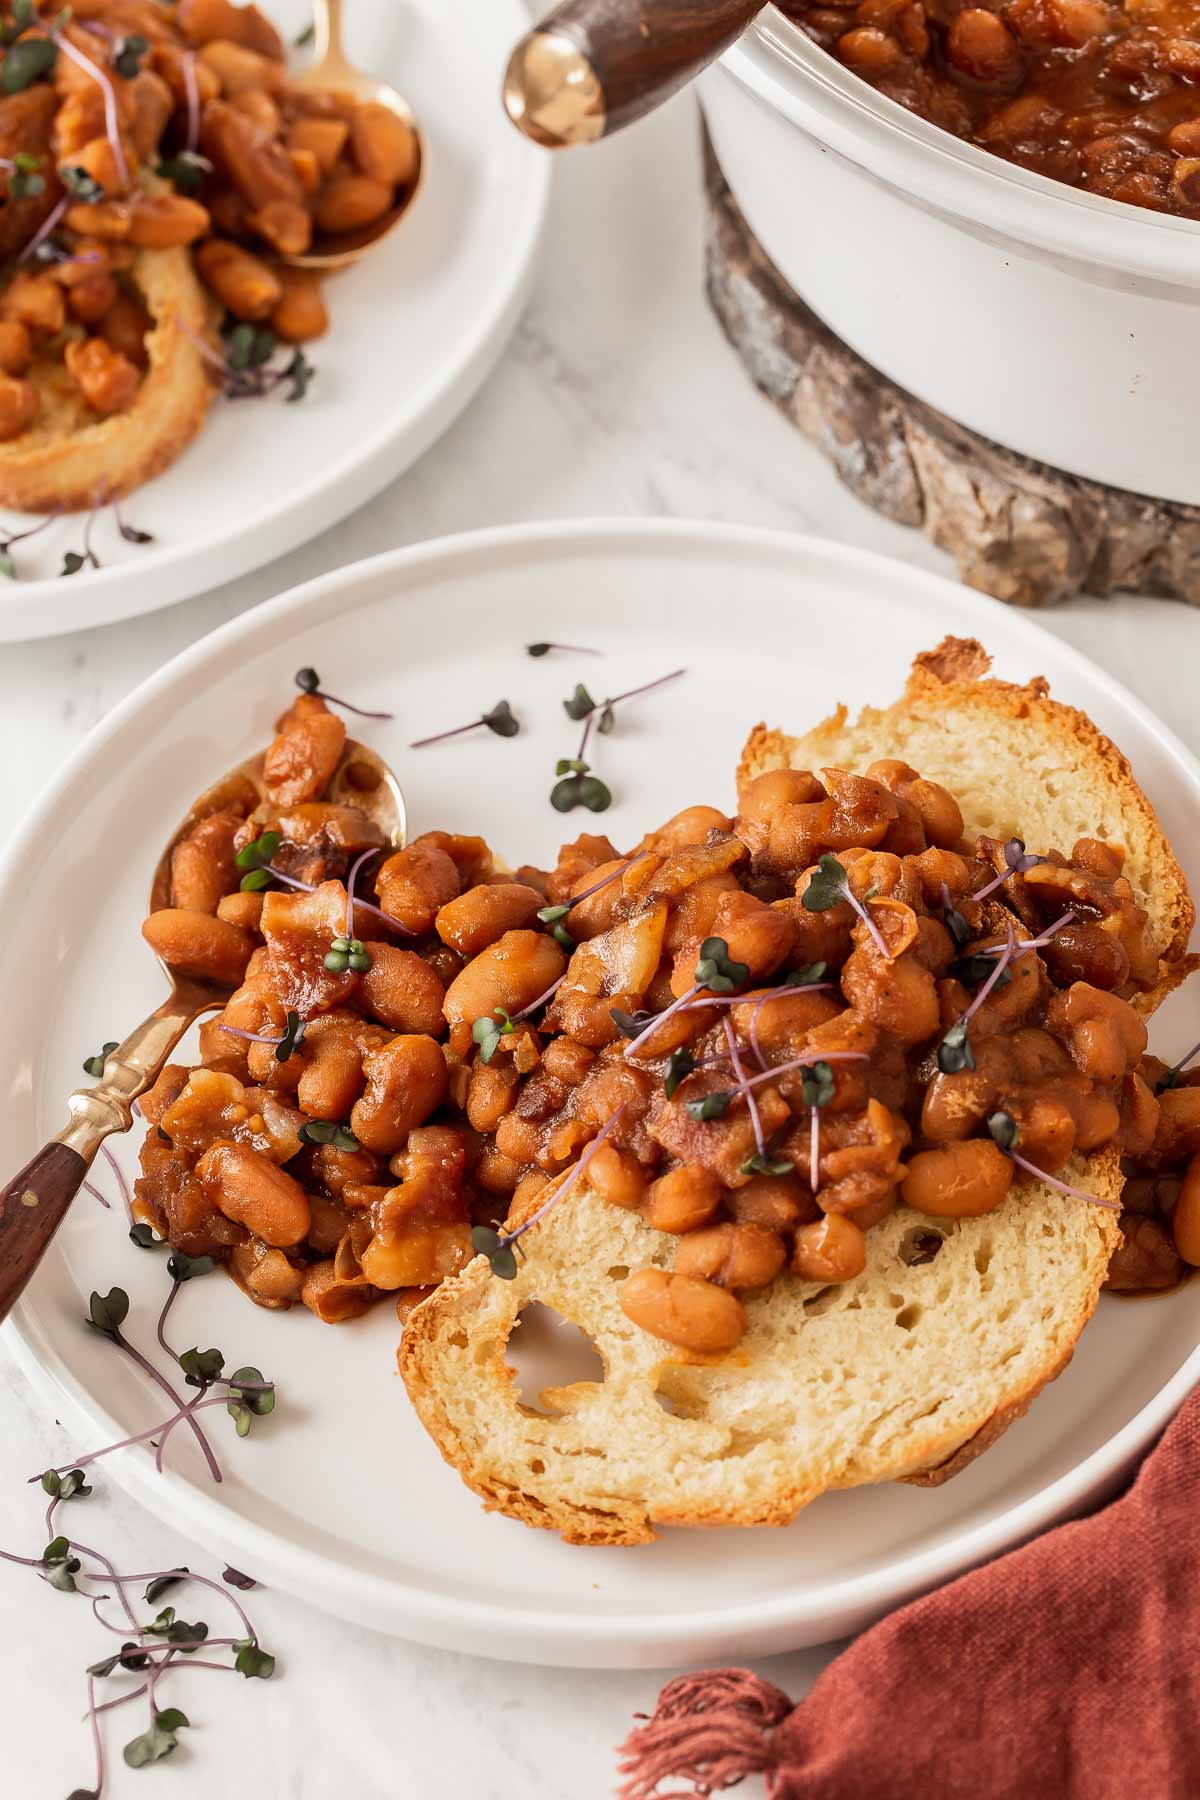 Boston baked beans scooped and served over toast with micro greens.